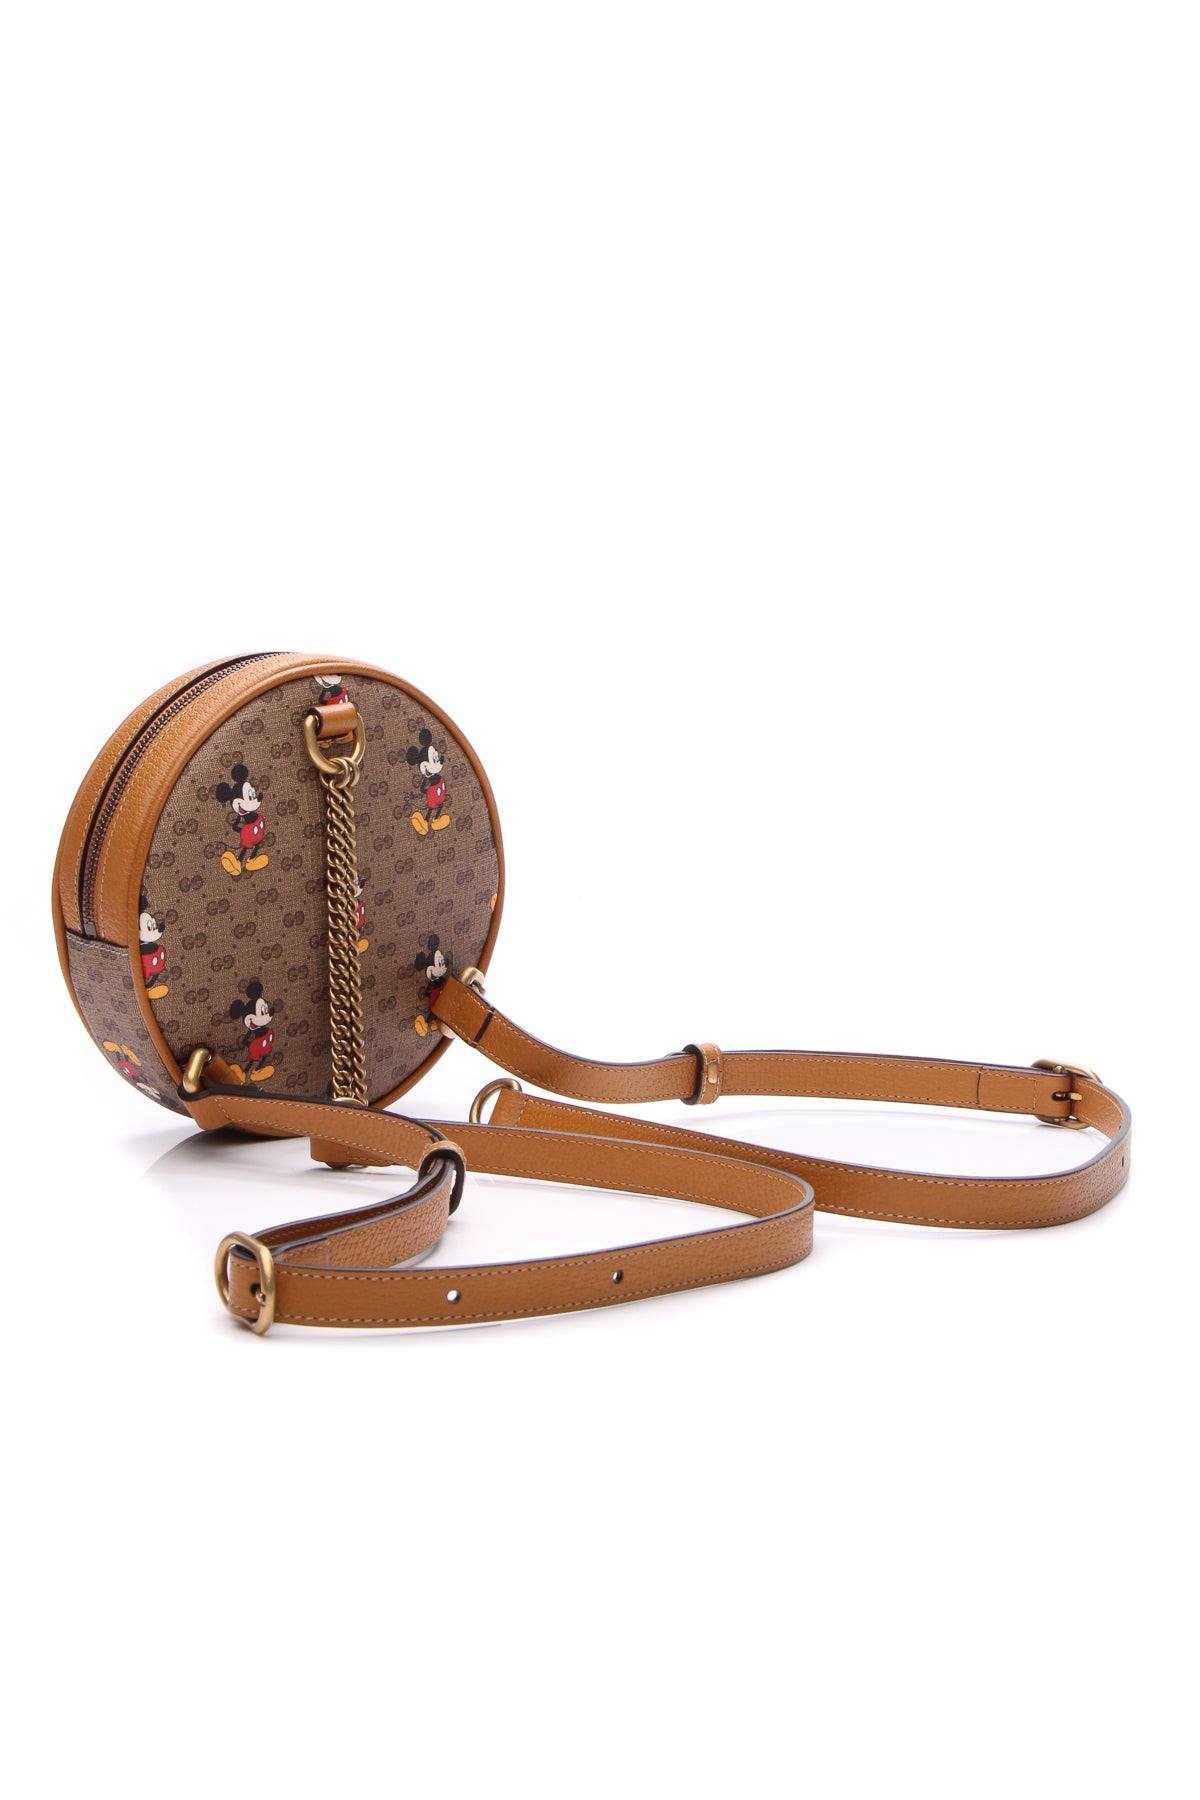 Buy Mickey Mouse Louis Vuitton Bag Online In India -  India